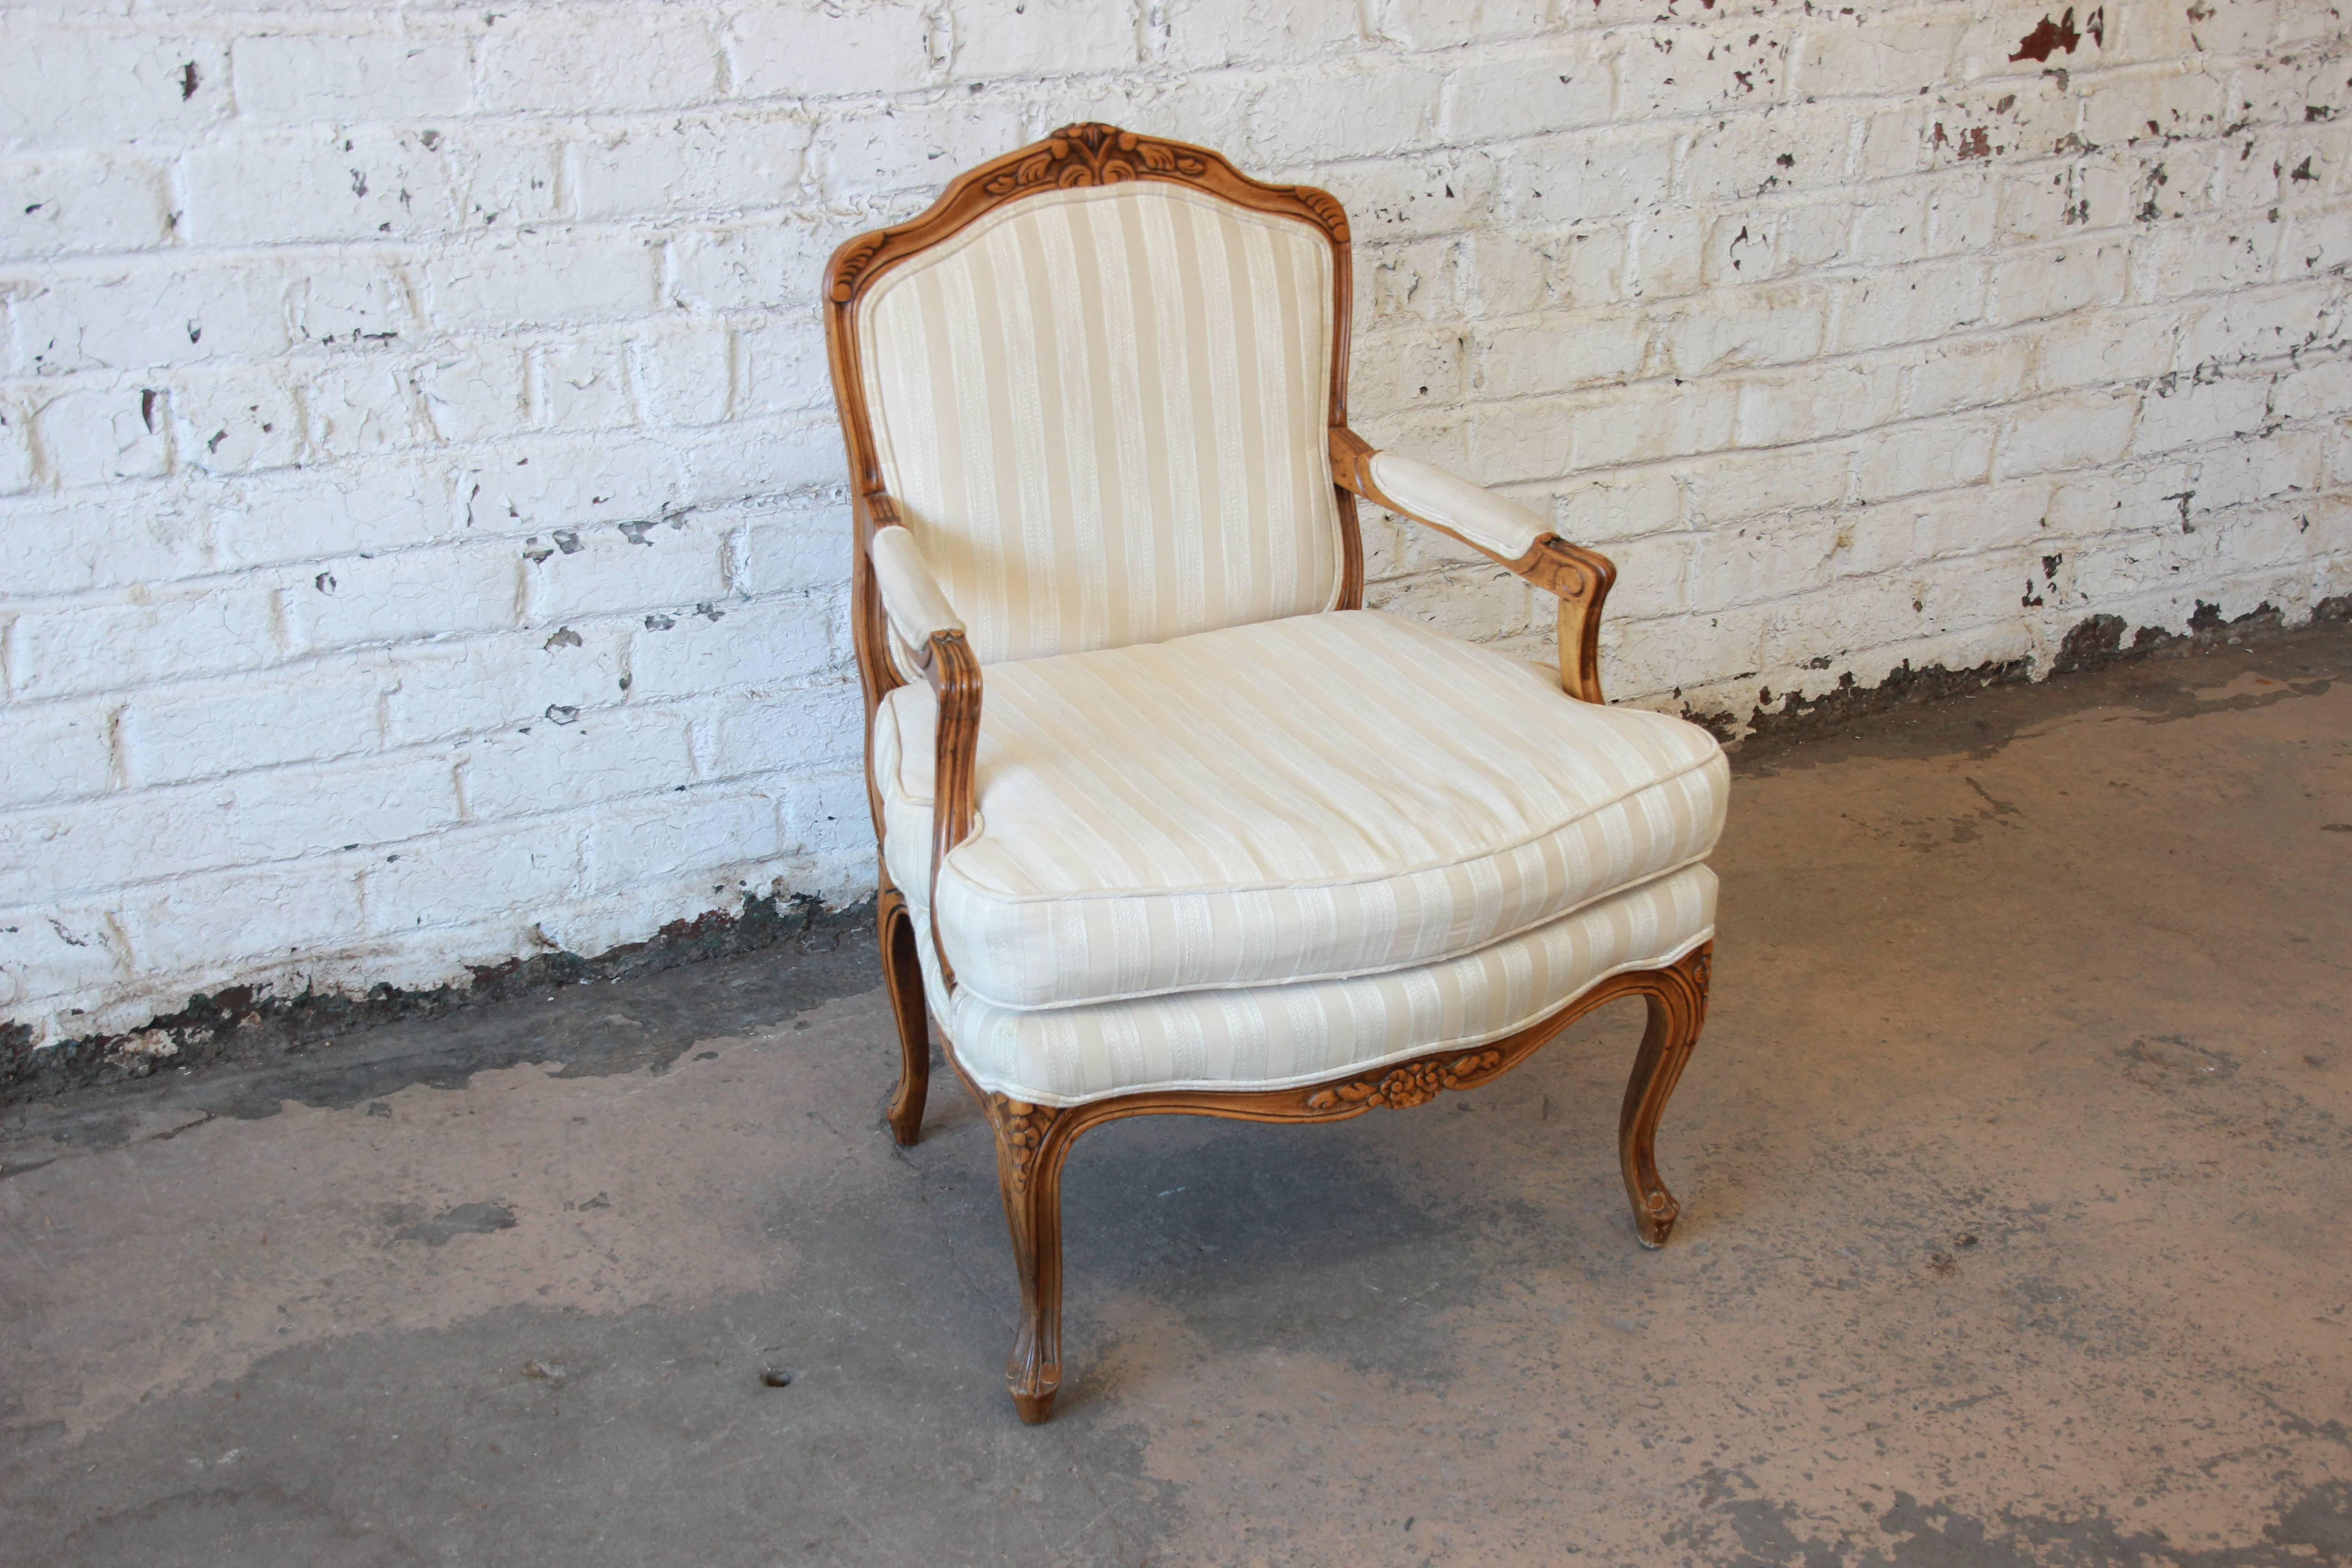 Offering a very nice Baker furniture French armchair. The chairs has a nice professionally cleaned Ivory upholstery. The chair is solid and sturdy with French carved details. It is comfortable and manufactured by Baker Furniture. Very minor wear